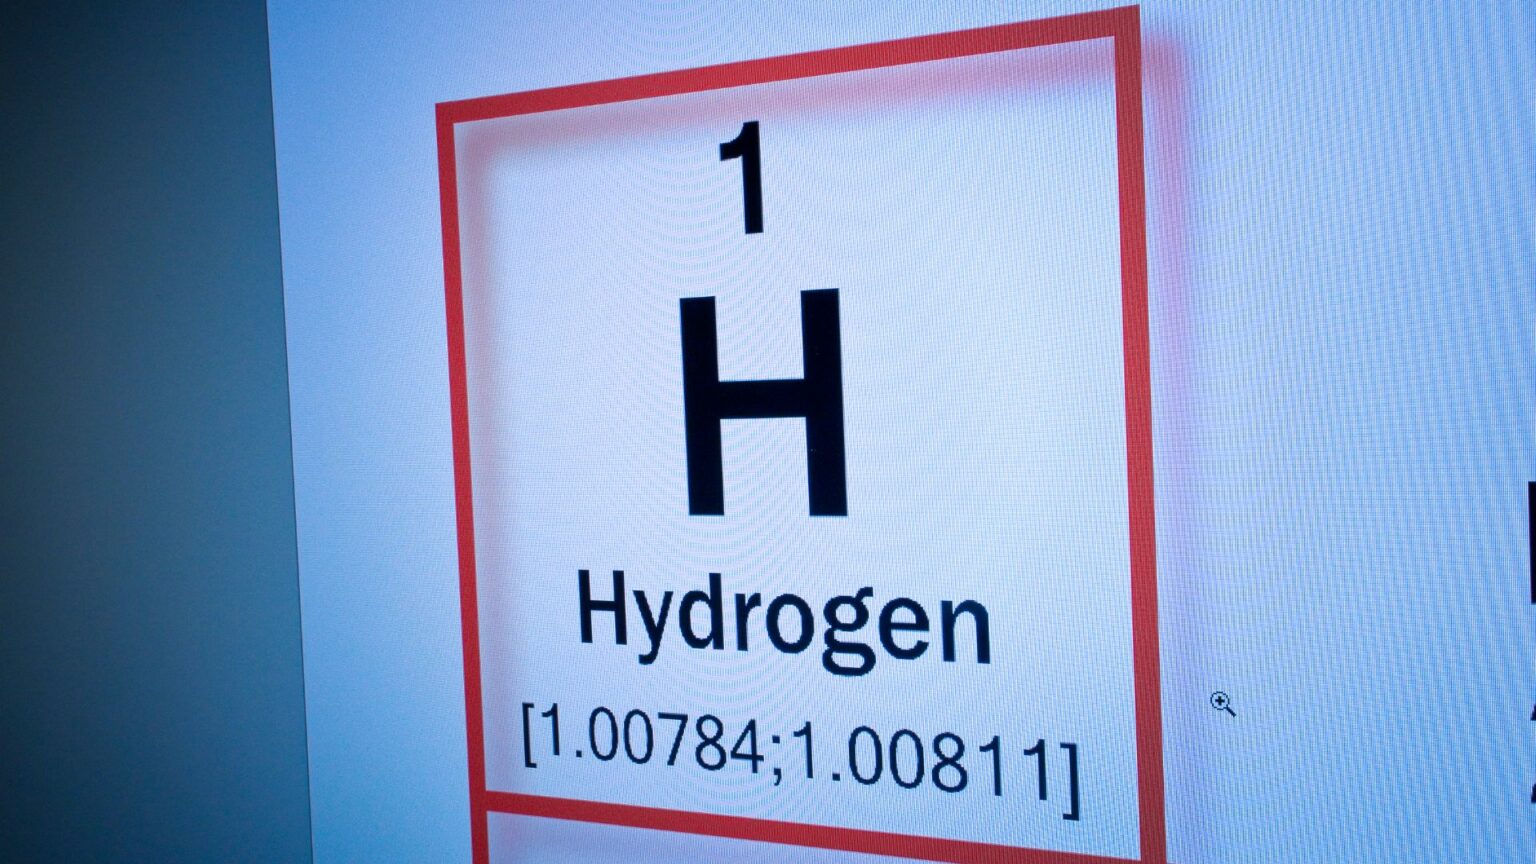 Algeria's Path to Becoming Europe's Green Hydrogen Supplier